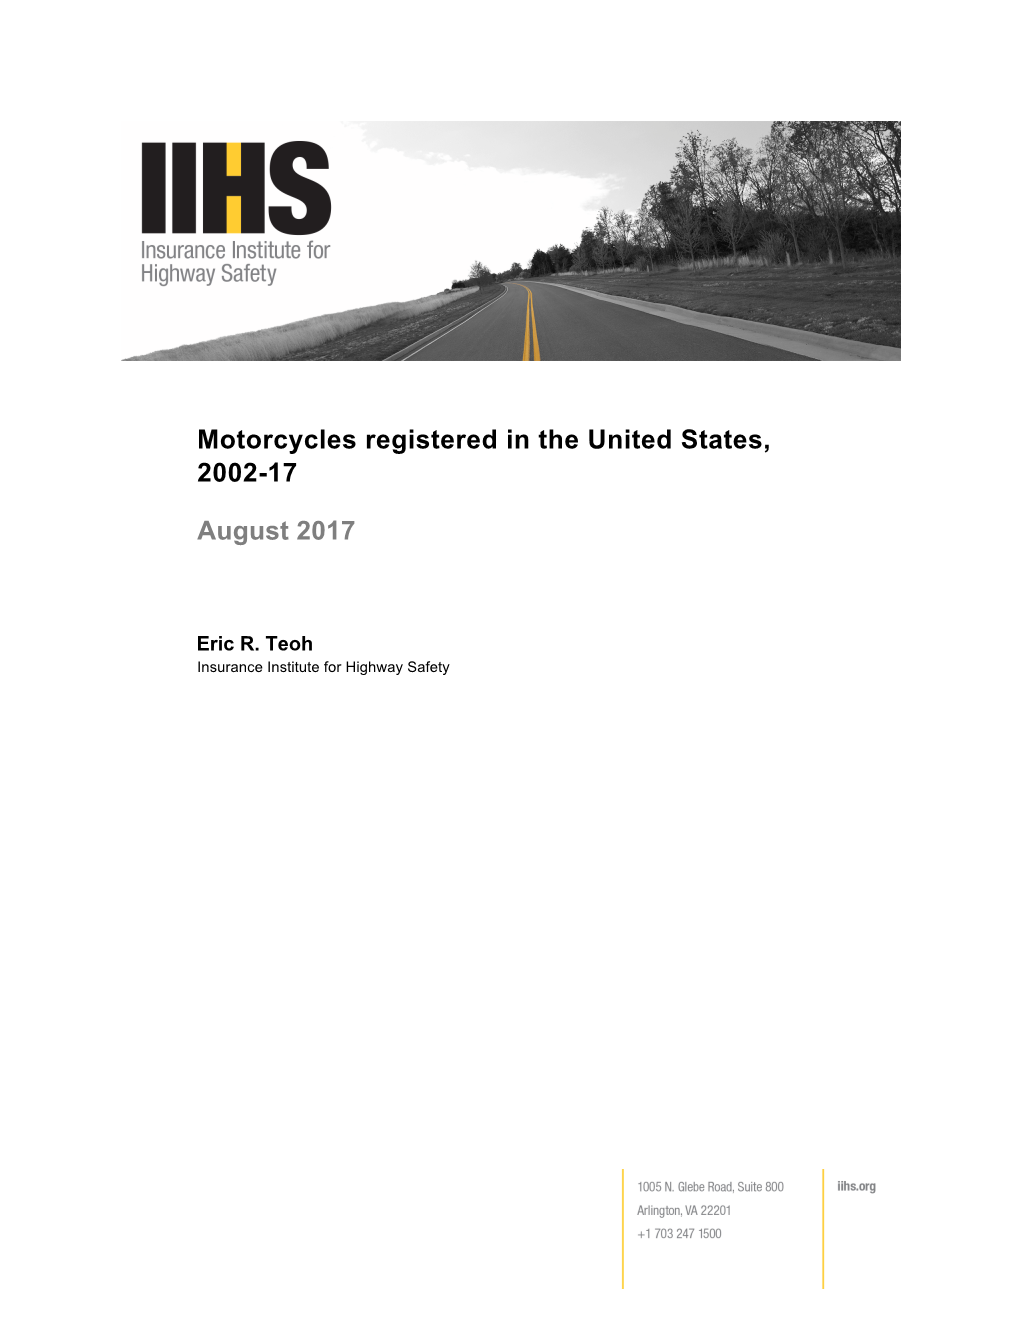 Motorcycles Registered in the United States, 2002-17